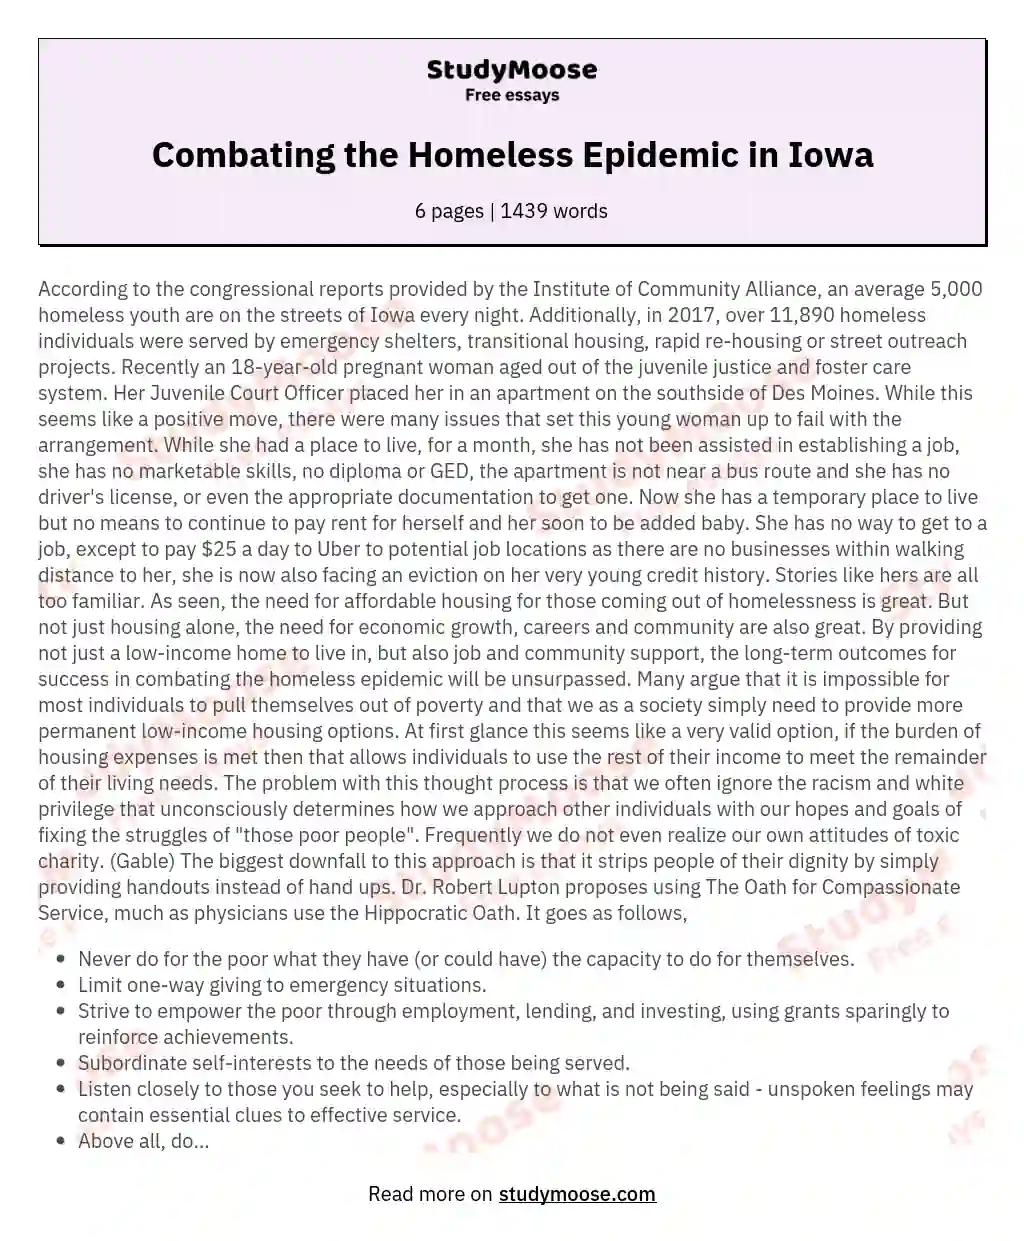 Combating the Homeless Epidemic in Iowa essay